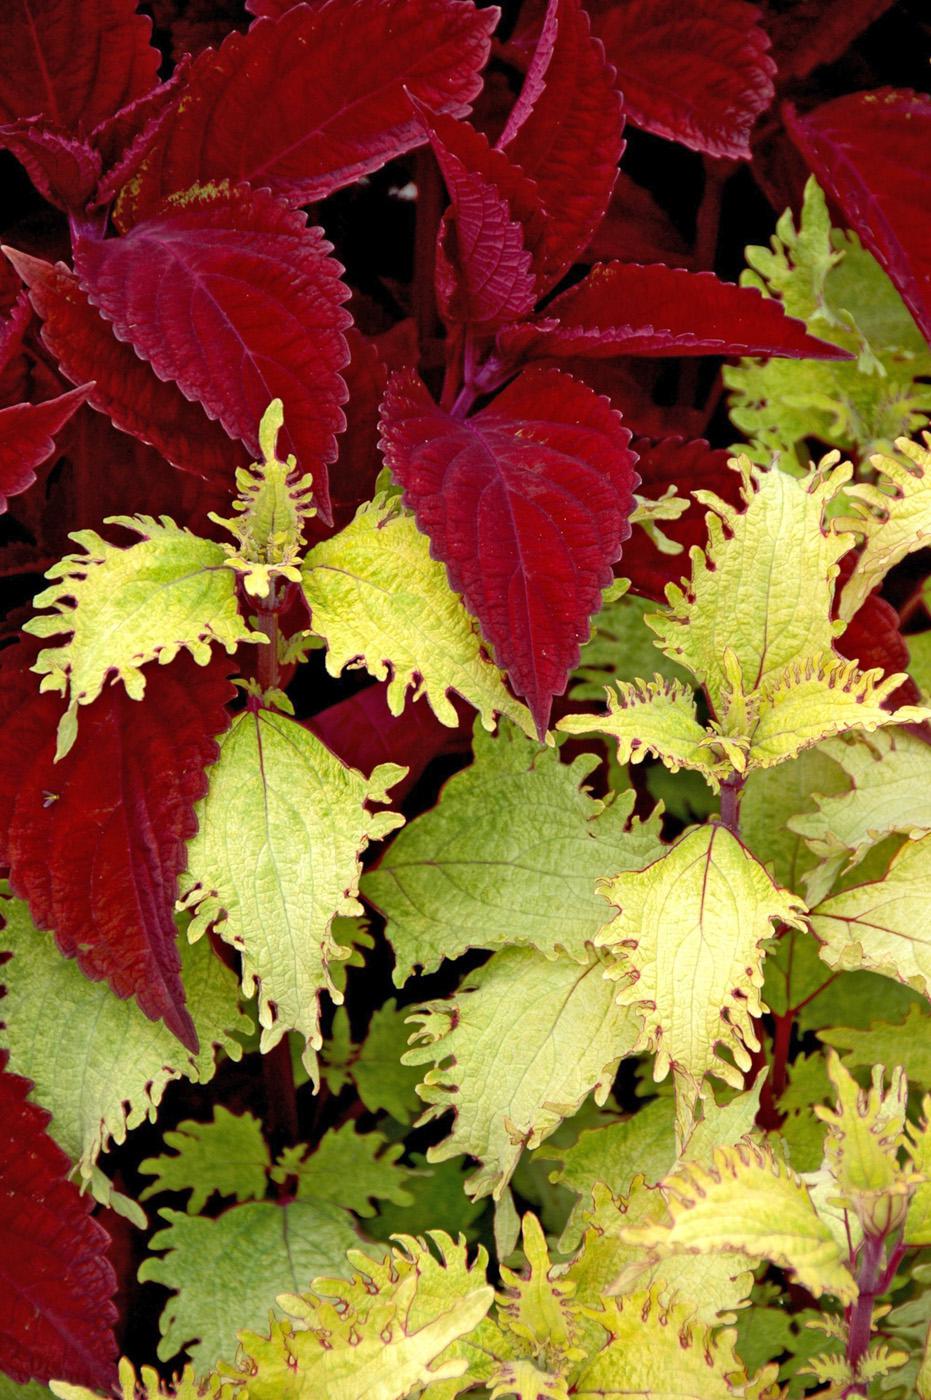 Big Red Judy, pictured here with Rose Stem Lace, is a large coleus with leaves that are a rich, vibrant red. The stems of Rose Stem Lace are this same color, making the two plants partner well in containers and landscapes.